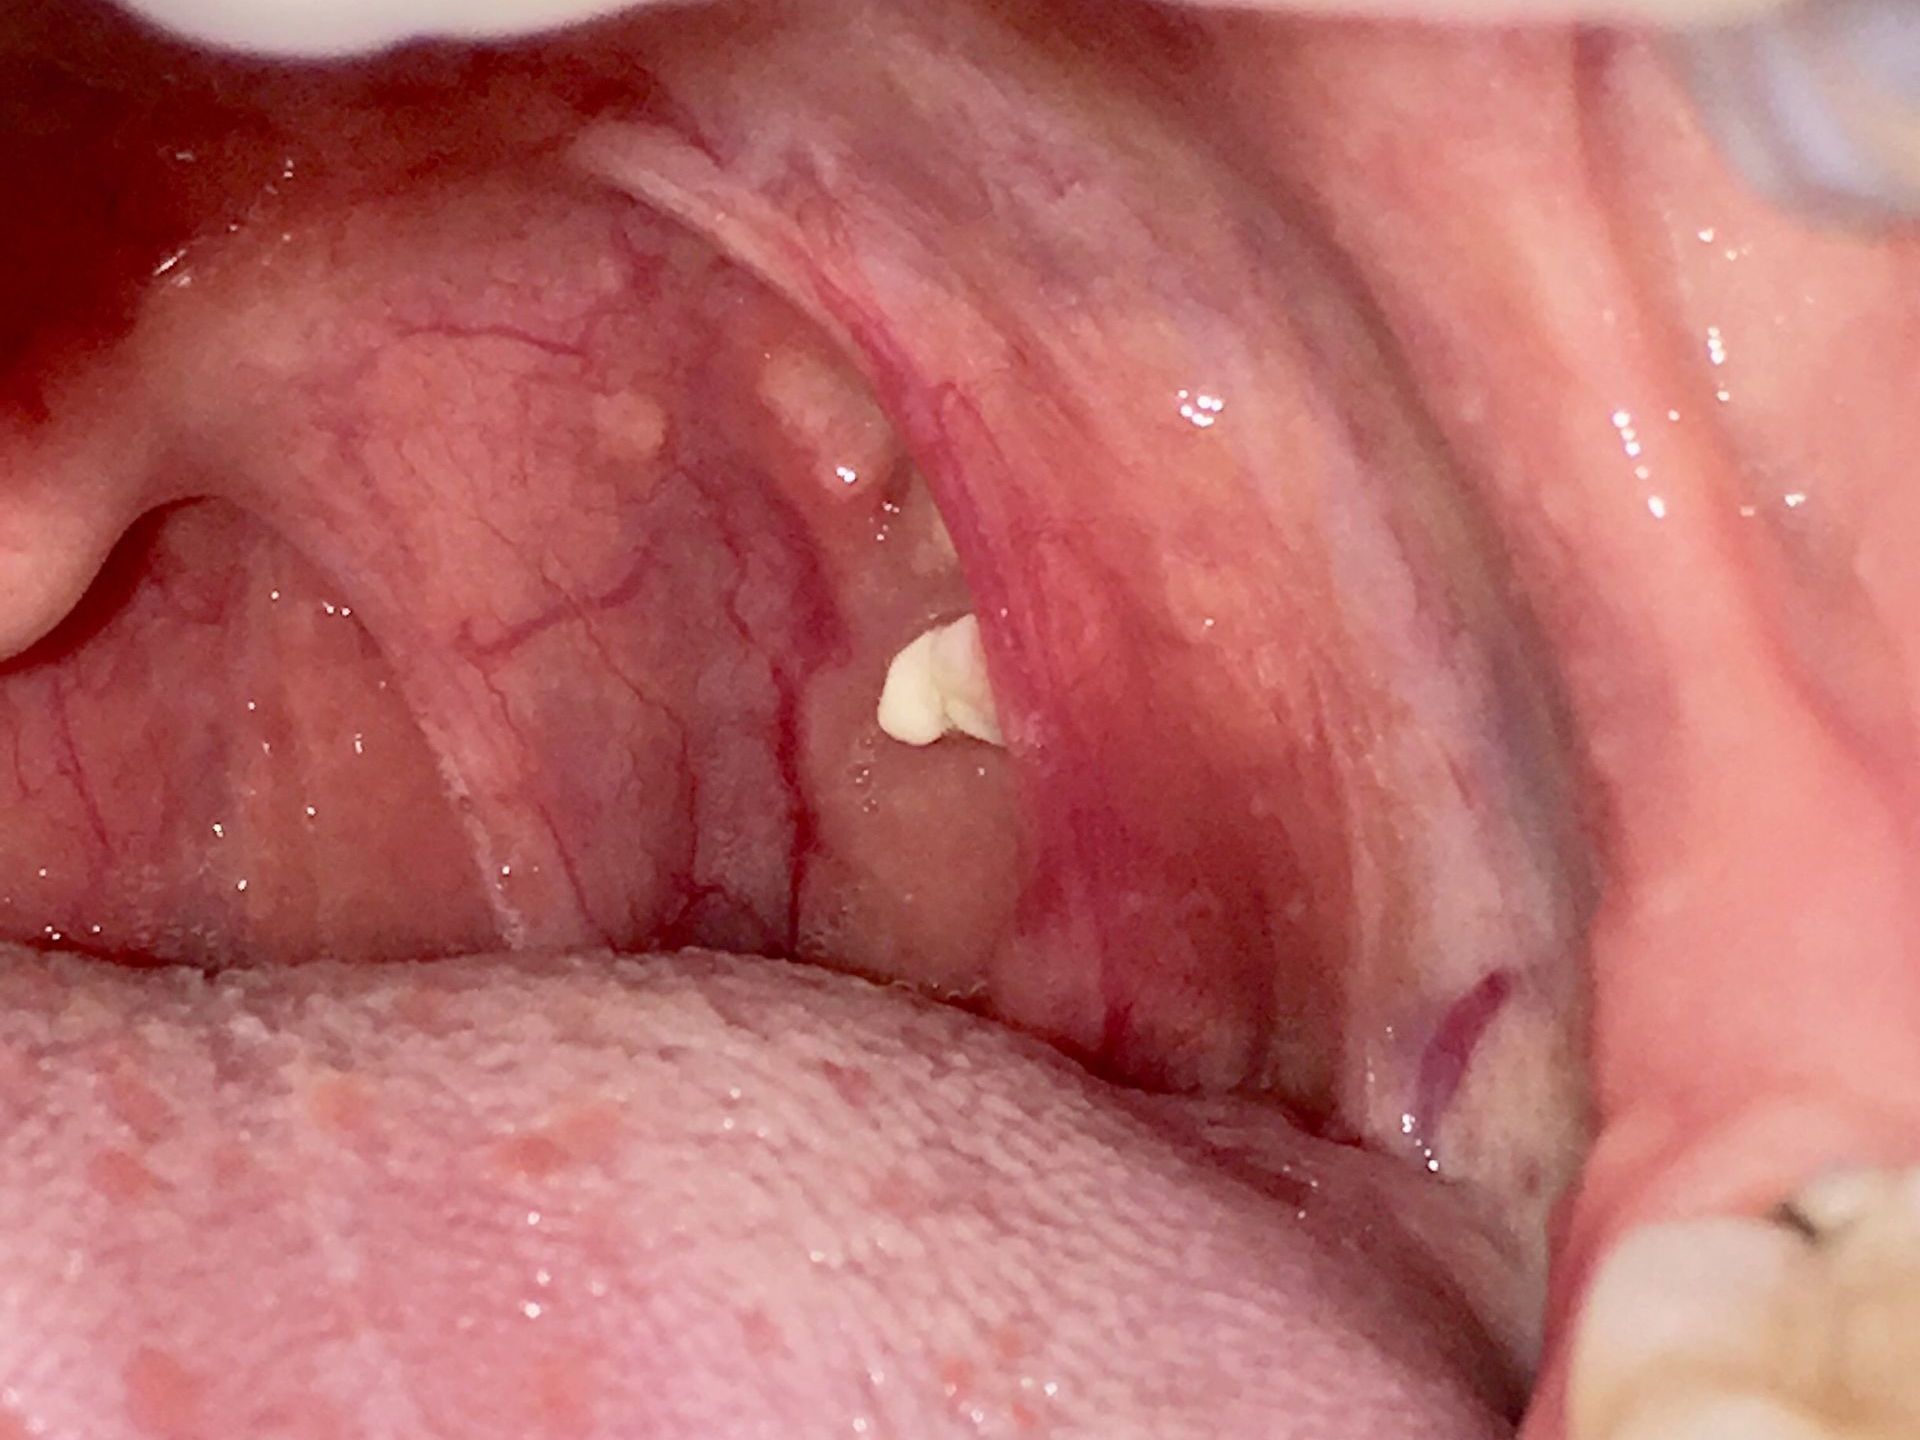 Tonsil stone in the left throat